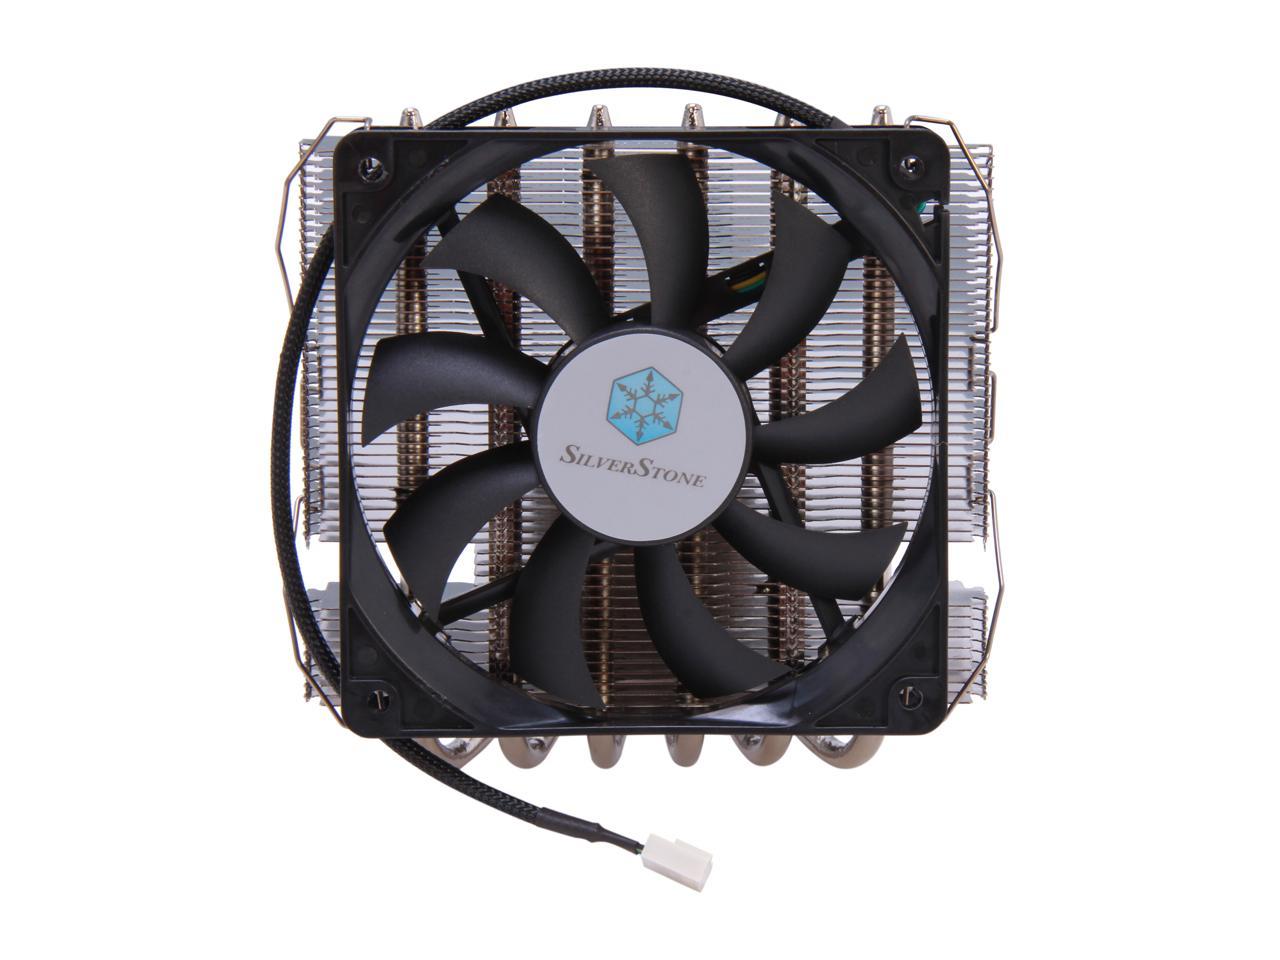 Silverstone Nt06 Pro Low Profile Cpu Cooler With Thin 120mm Fan Neweggca 9349